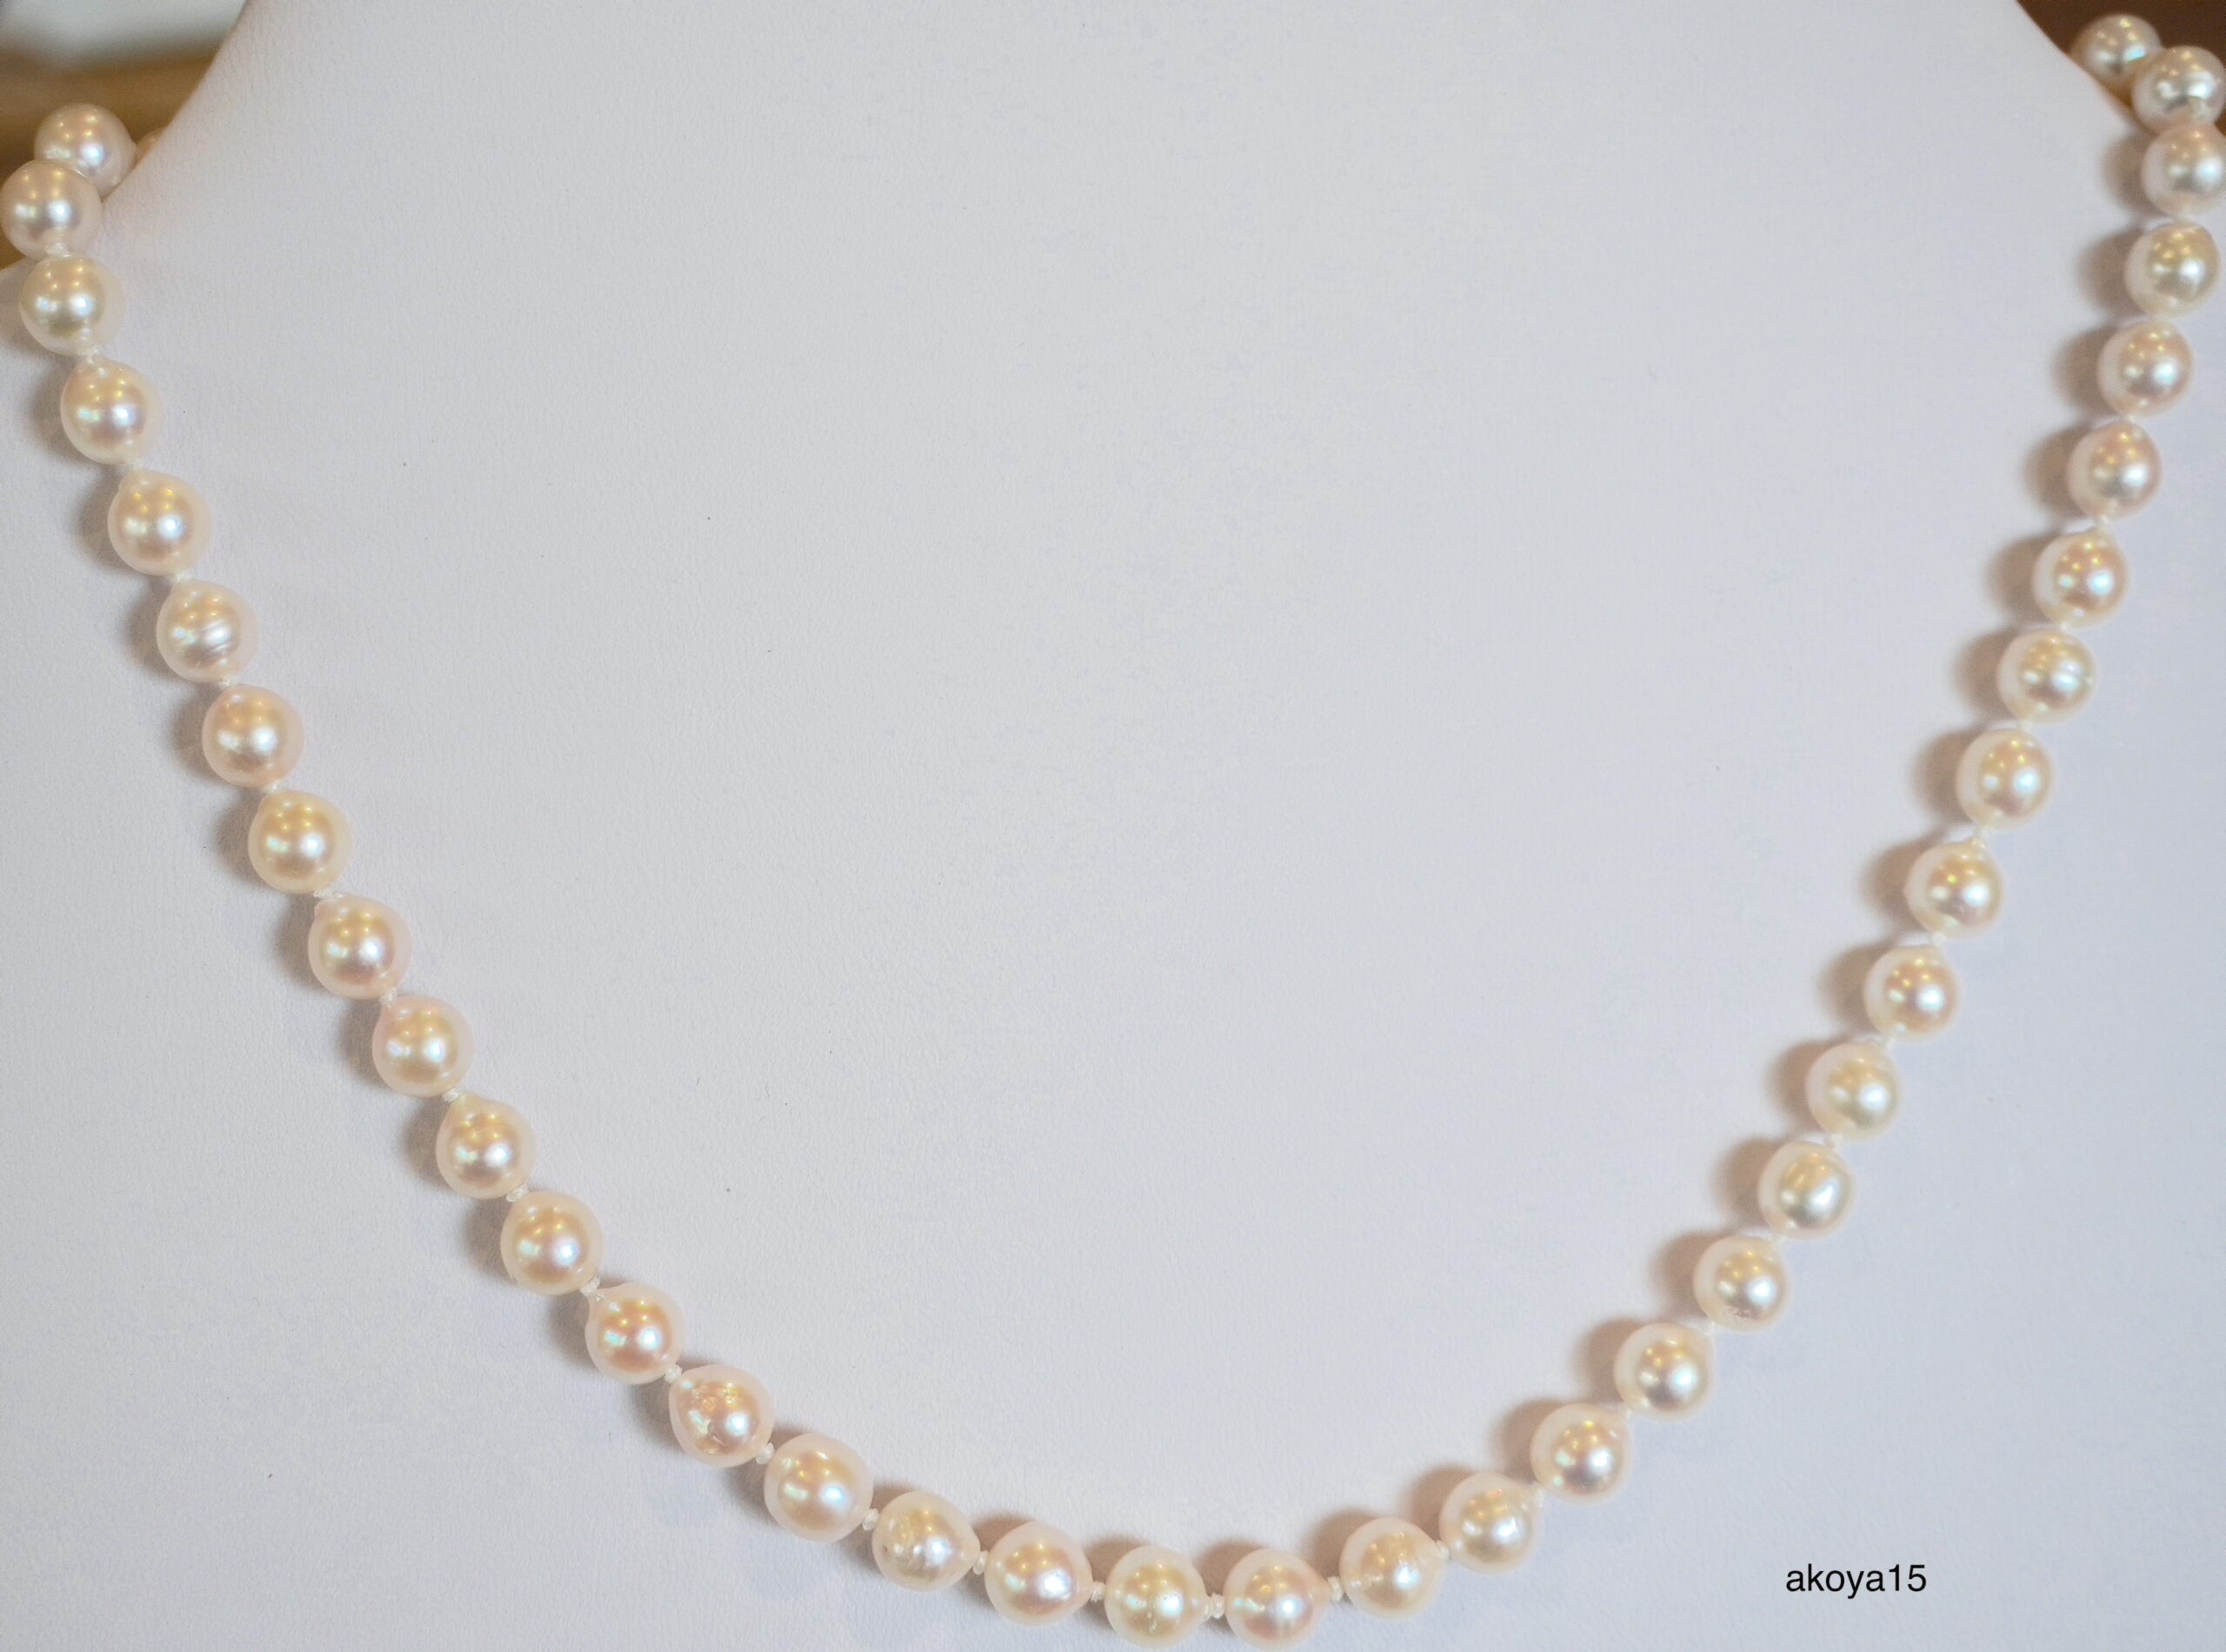 Japanese Akoya pearl necklace creamy white 7-7.5mm lustrous with 14k ...